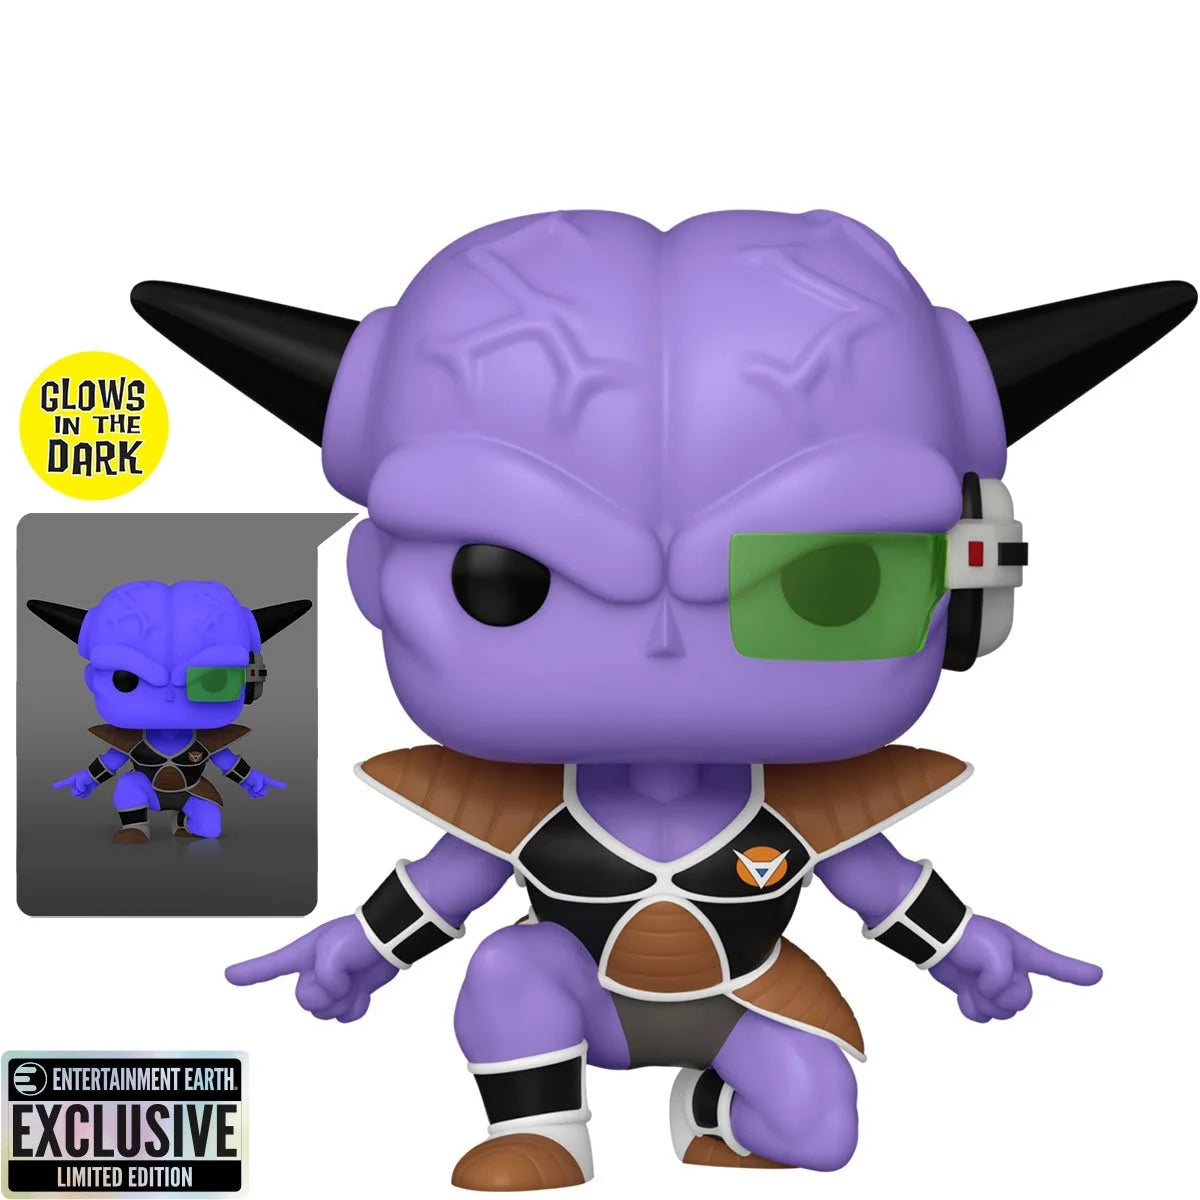 Dragon Ball Z Pops Launch at Funko Fair With Exclusives